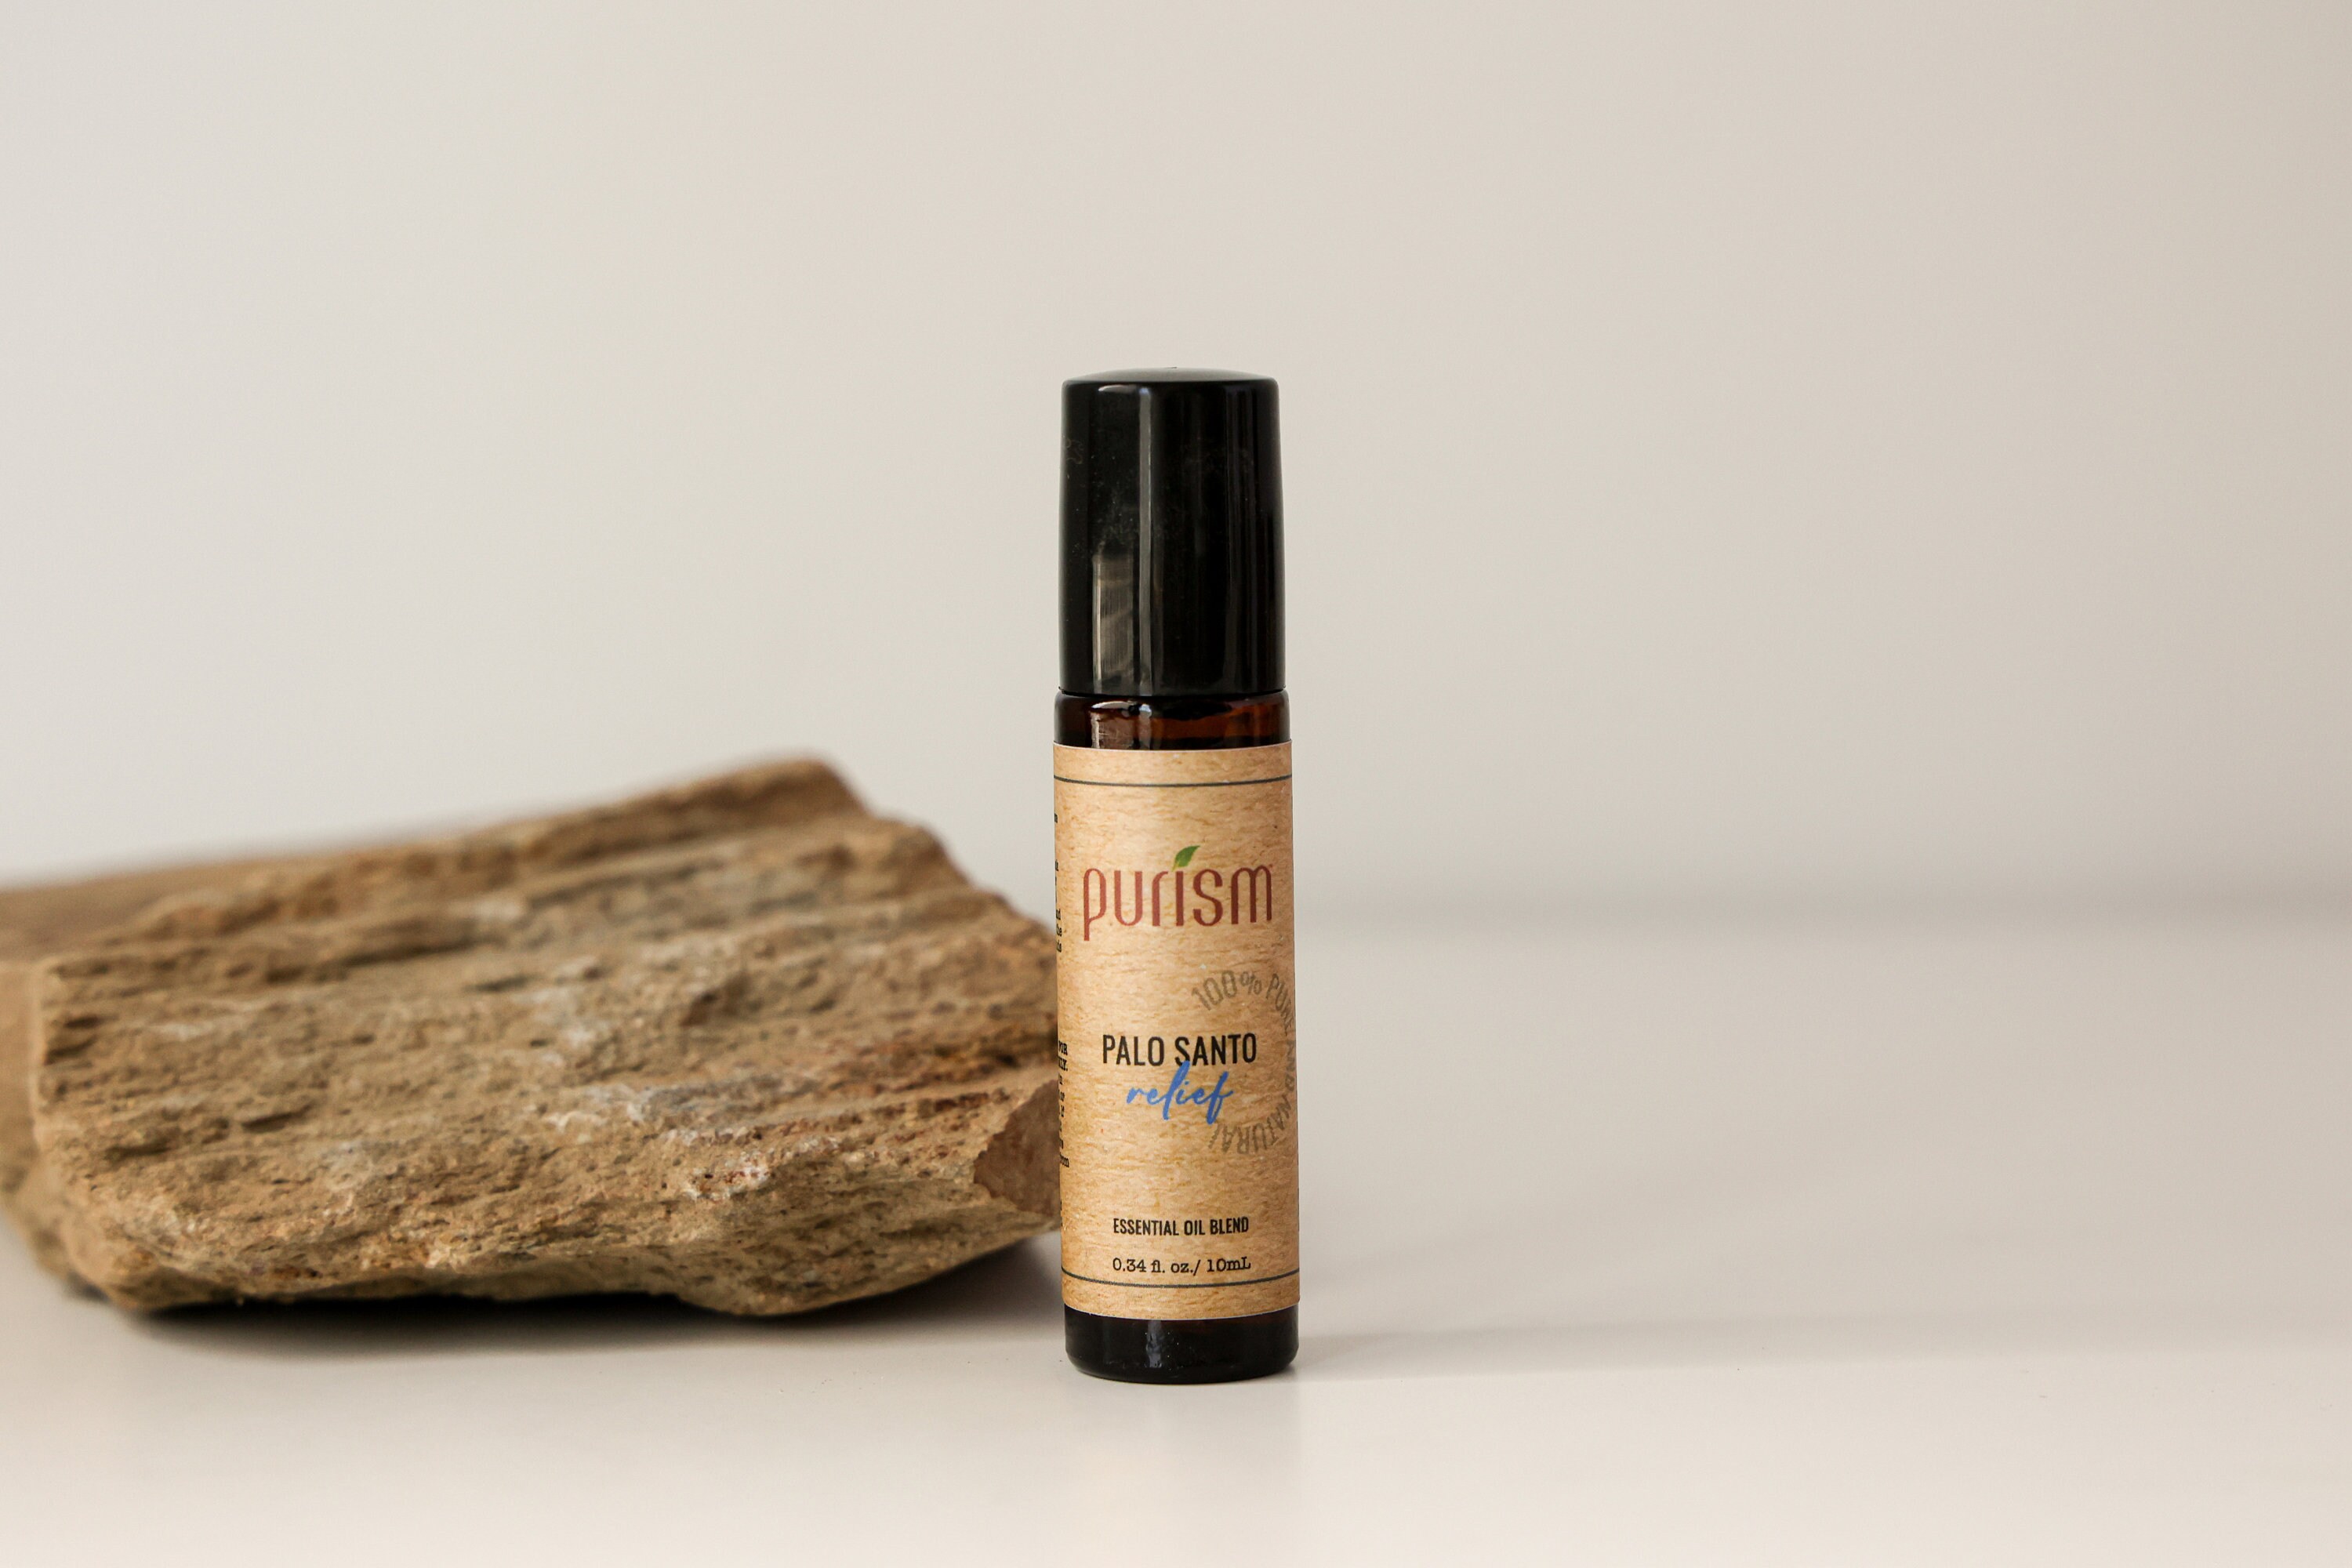 Palo Santo Essential Oil, Uses, Benefits, and Blends